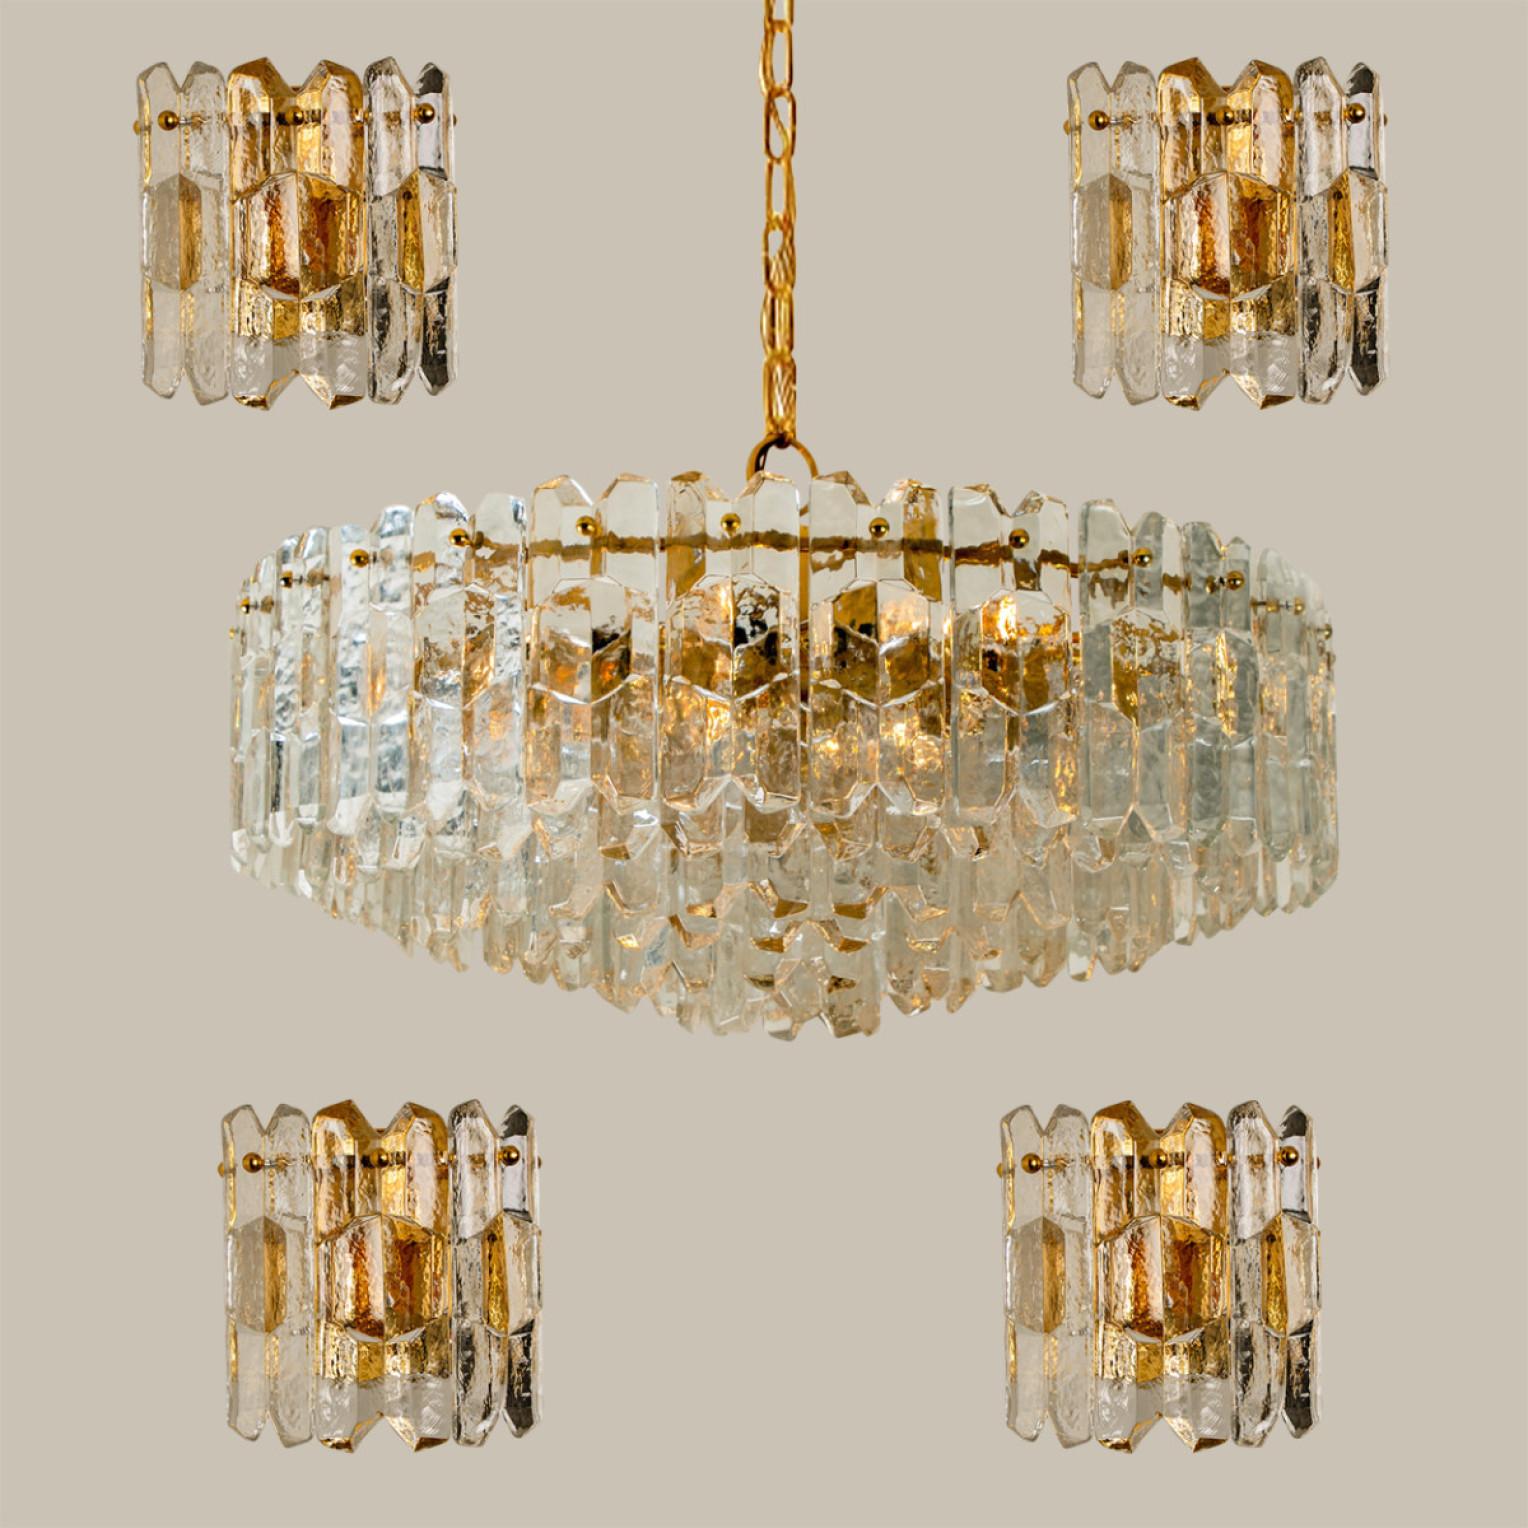 Set of 5 high-end and handmade gilt brass 24-karat gold-plated wall lights (4) and flushmount (1) made by Kalmar in Austria, Europe. This model 